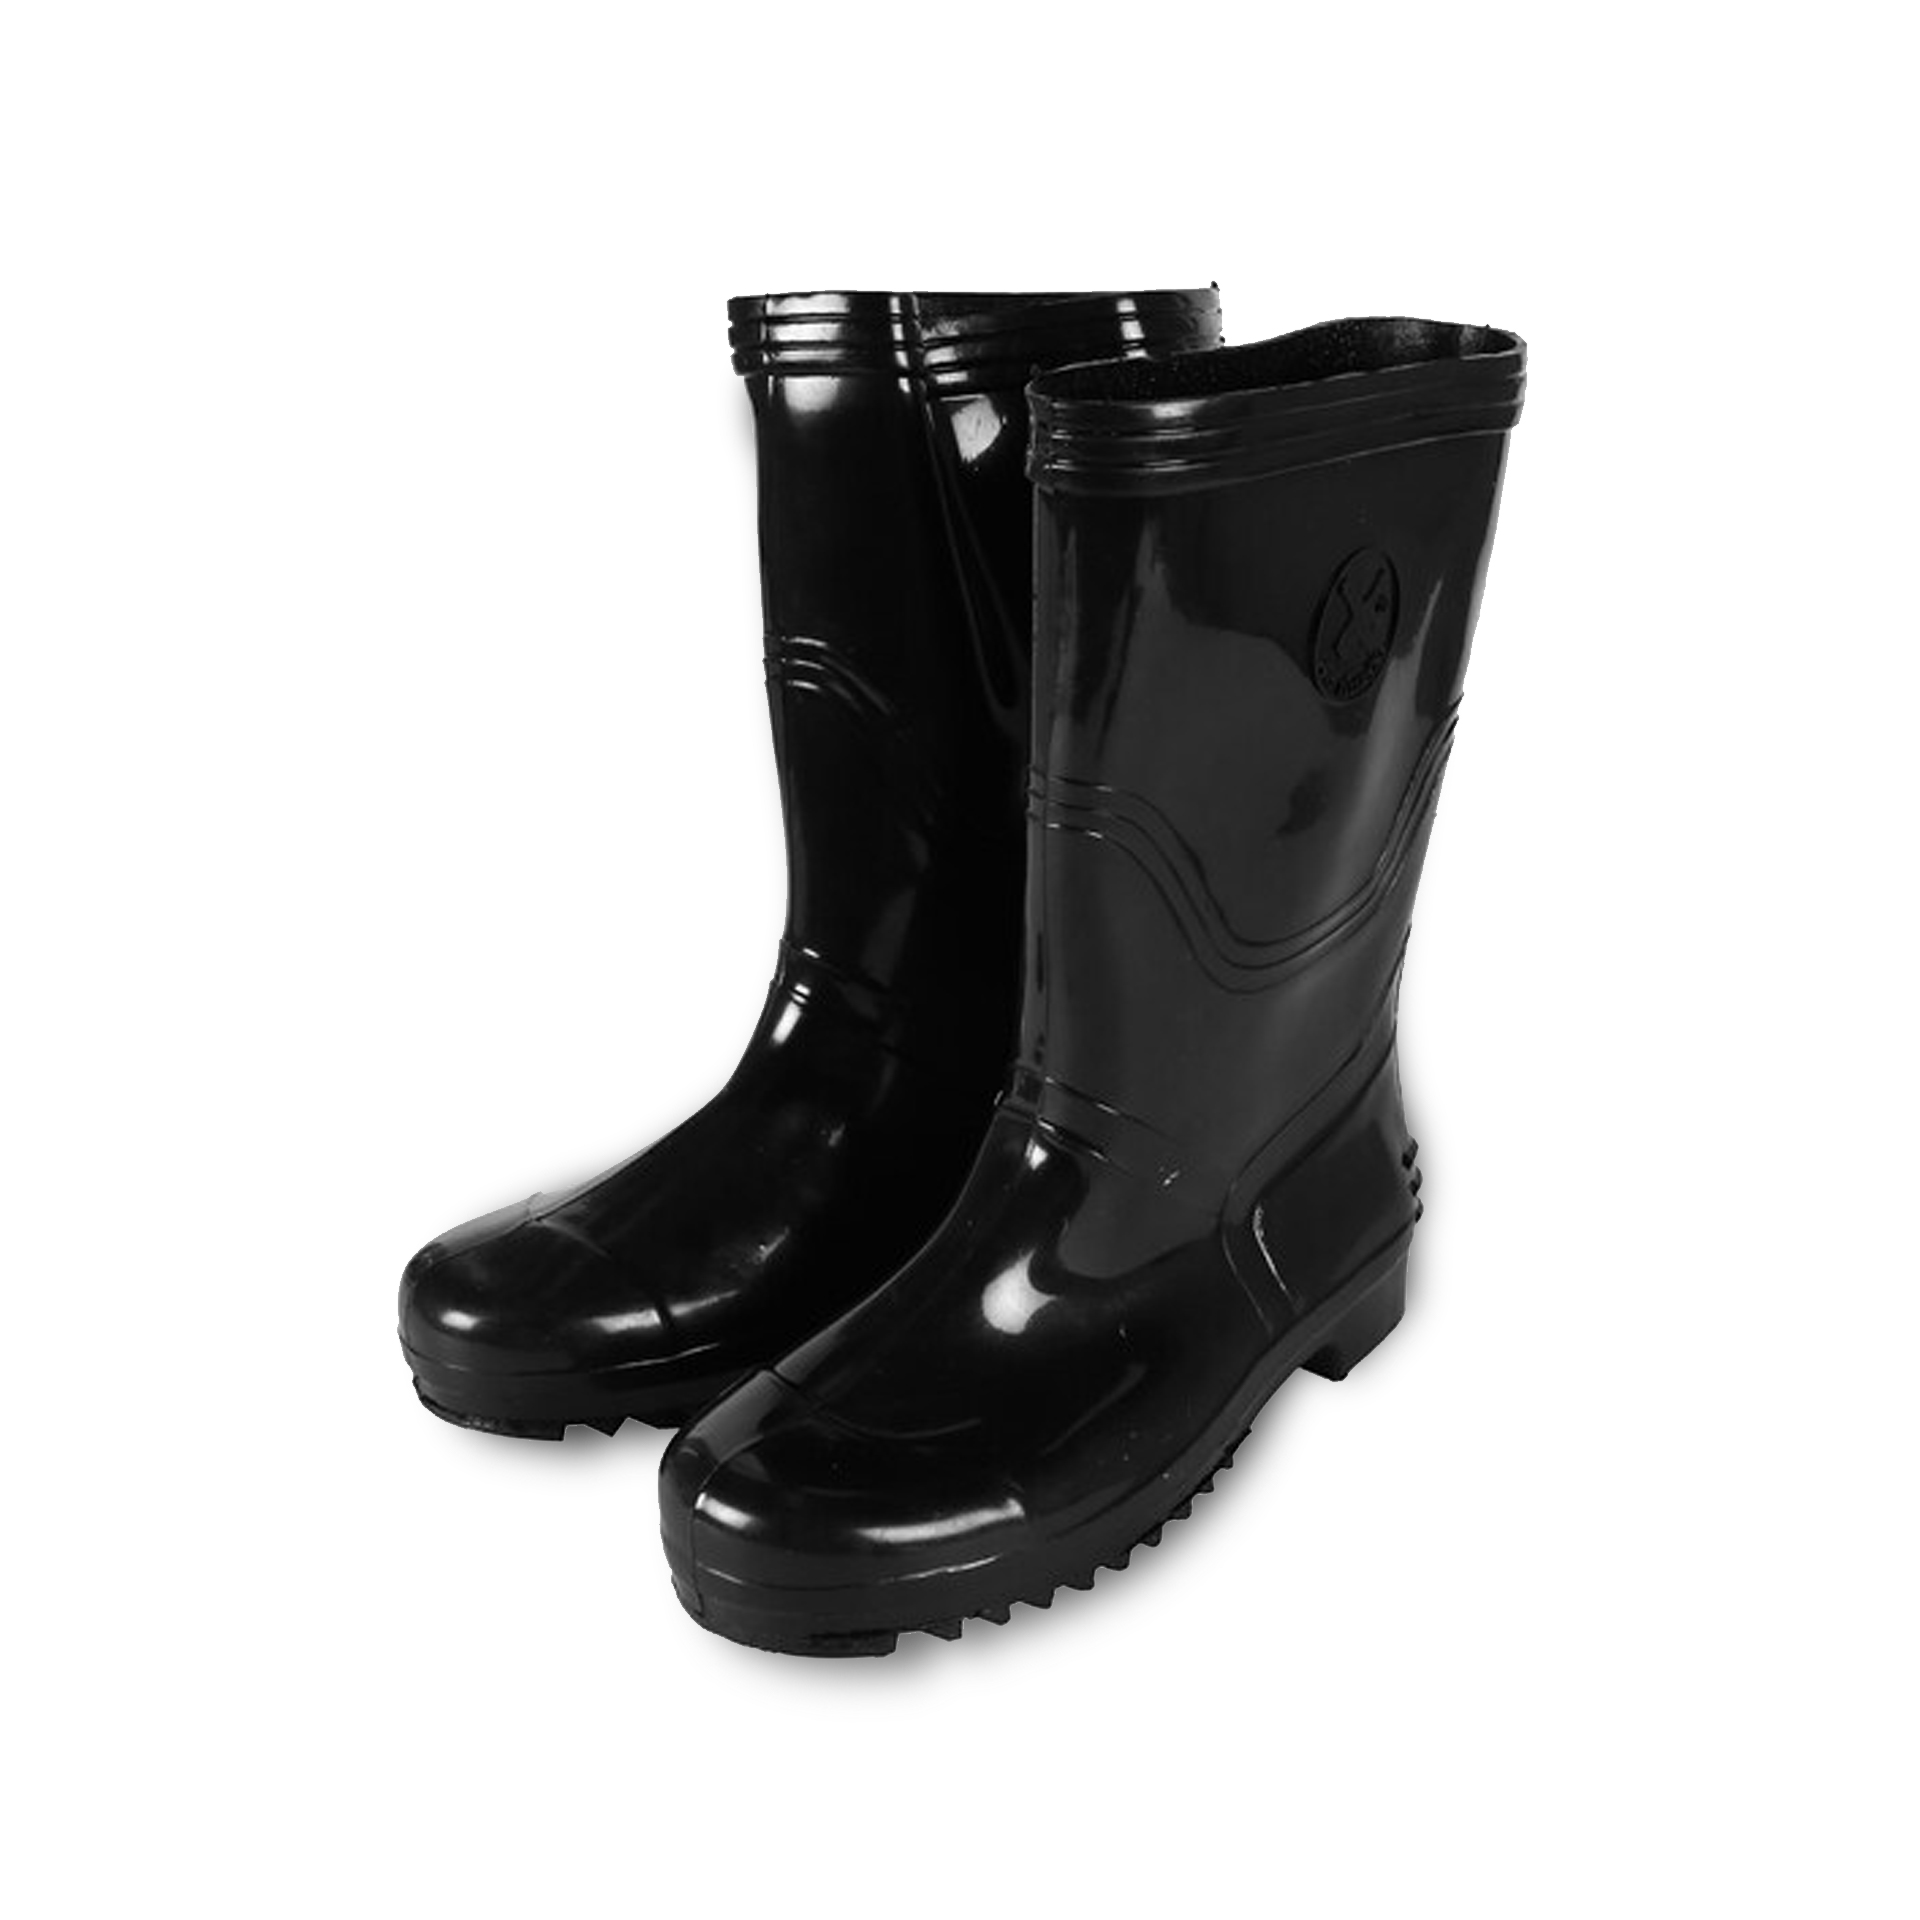 BOOTS PLASTIC PVC HEIGHT 12 INCH. SIZE 10-BLACK